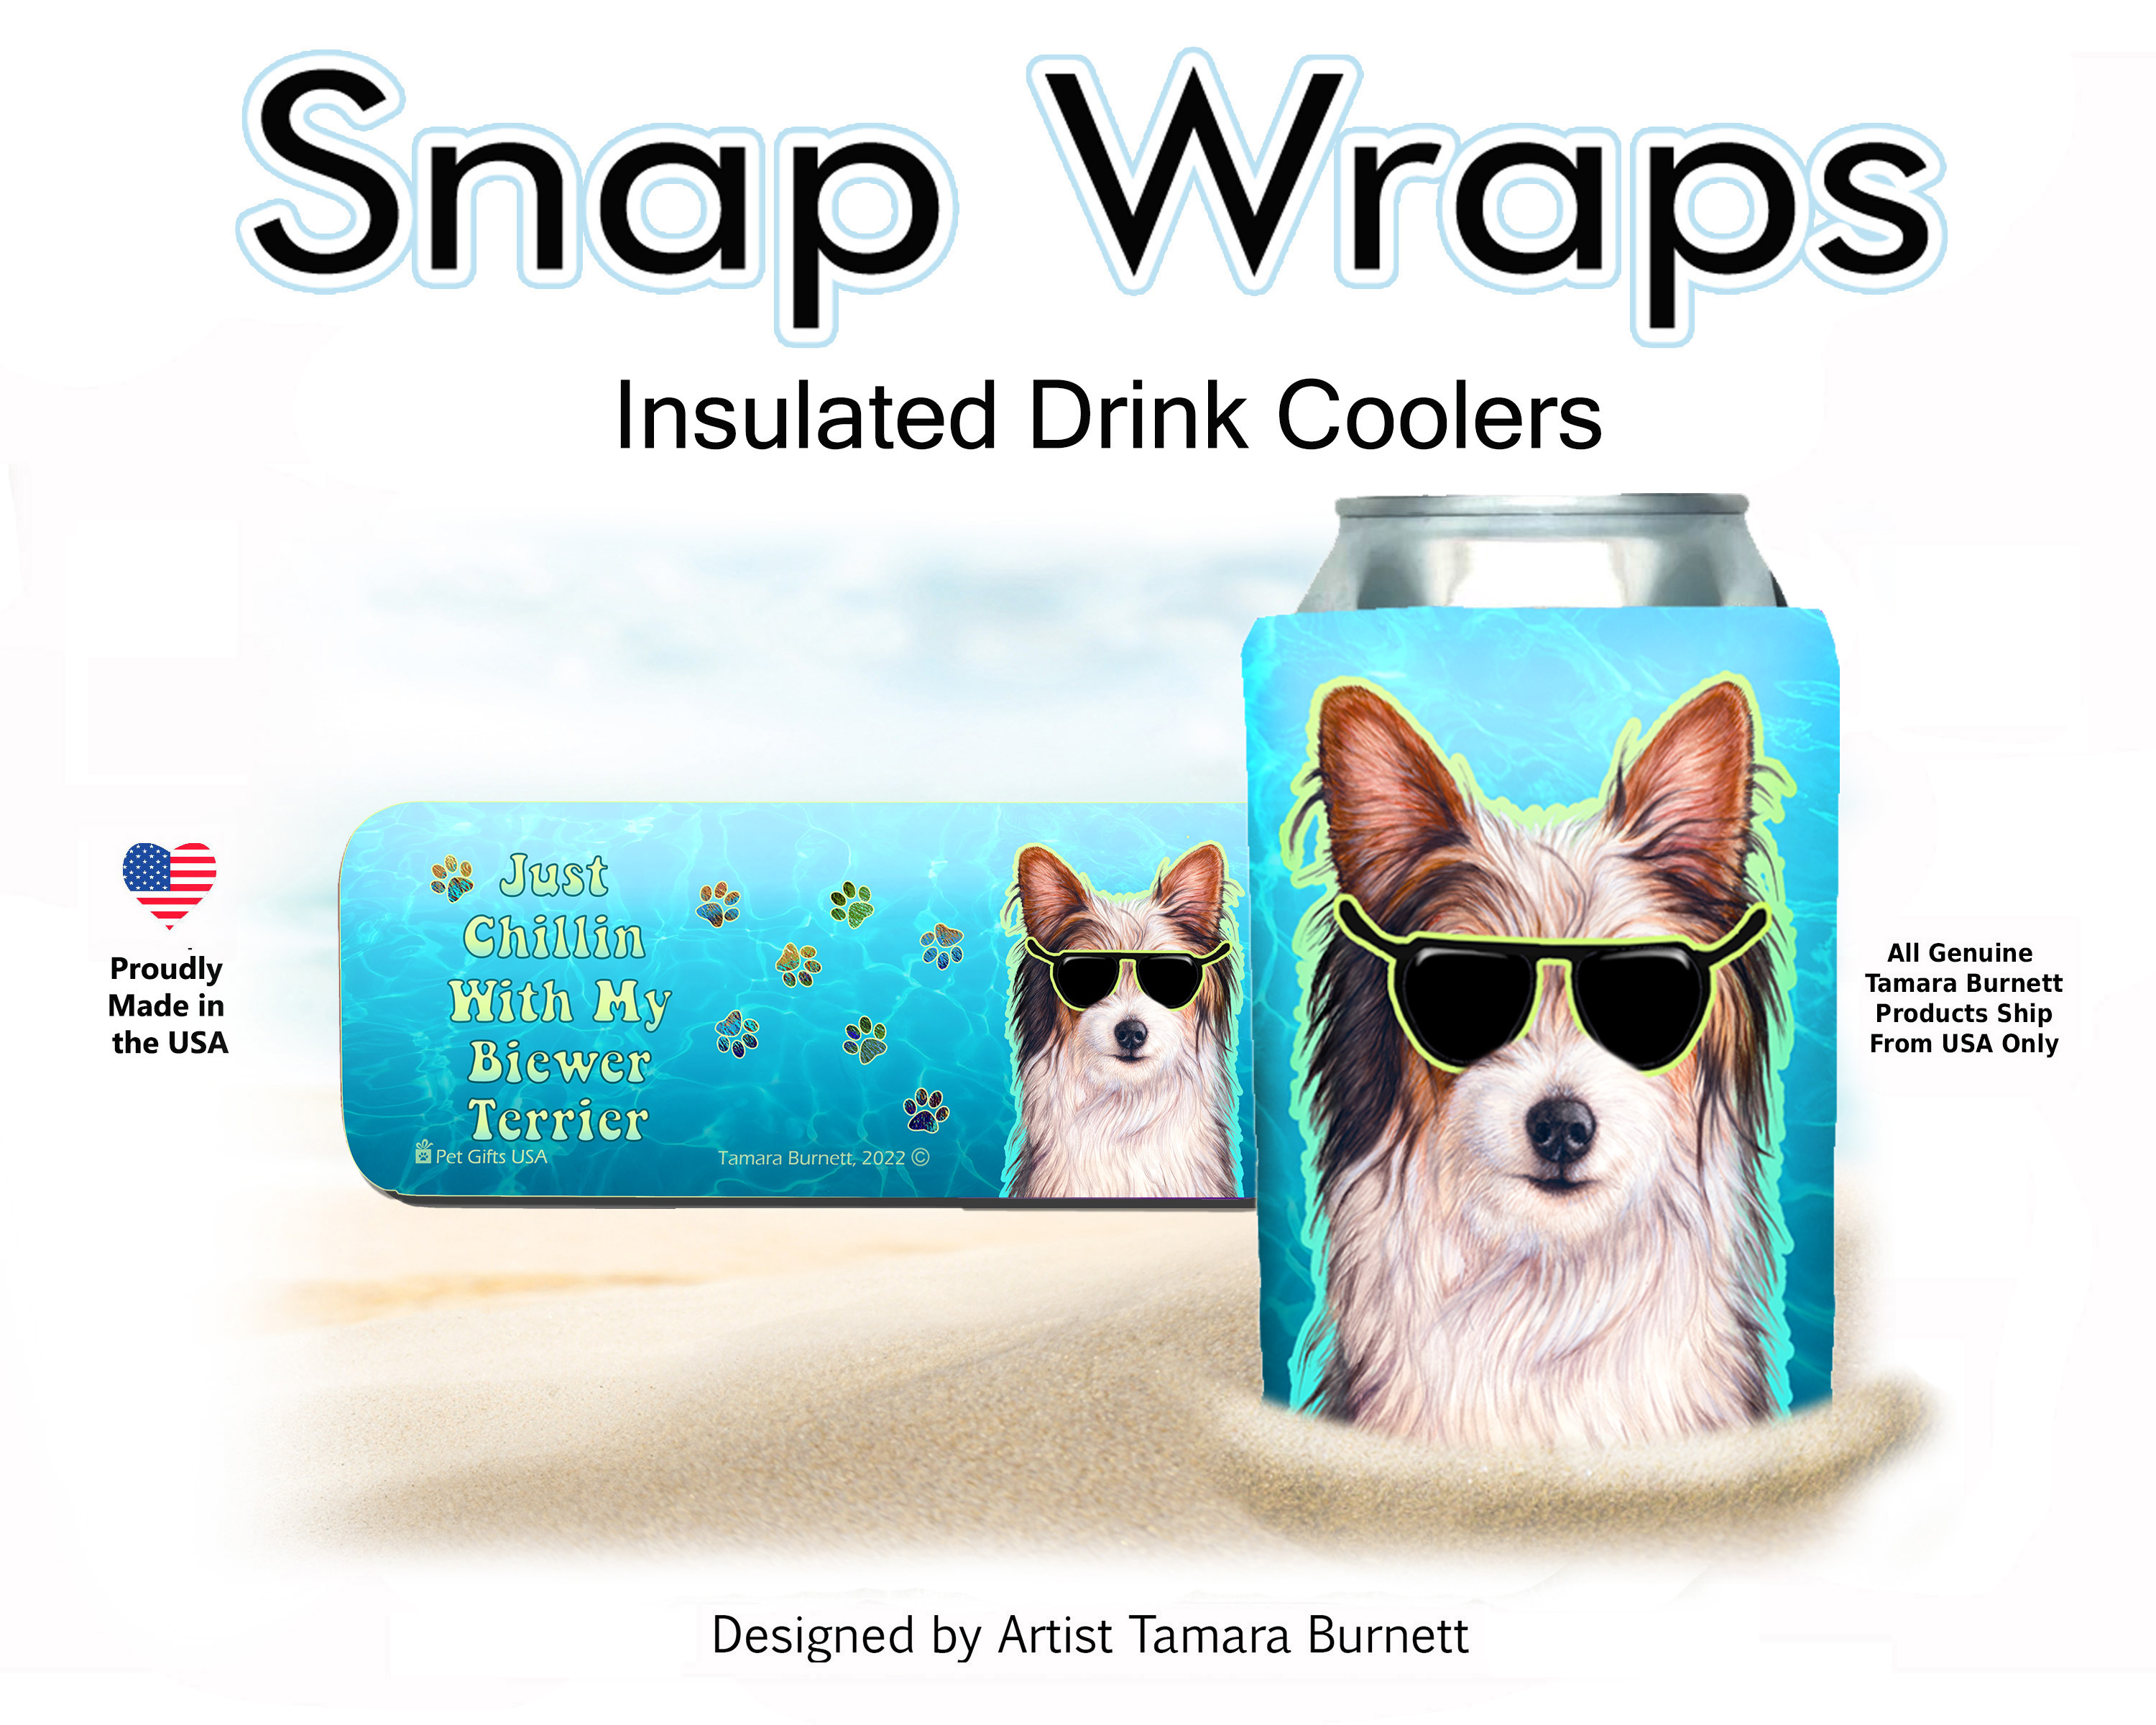 Biewer Terrier Snap Wrap Insulated Drink Holder Image